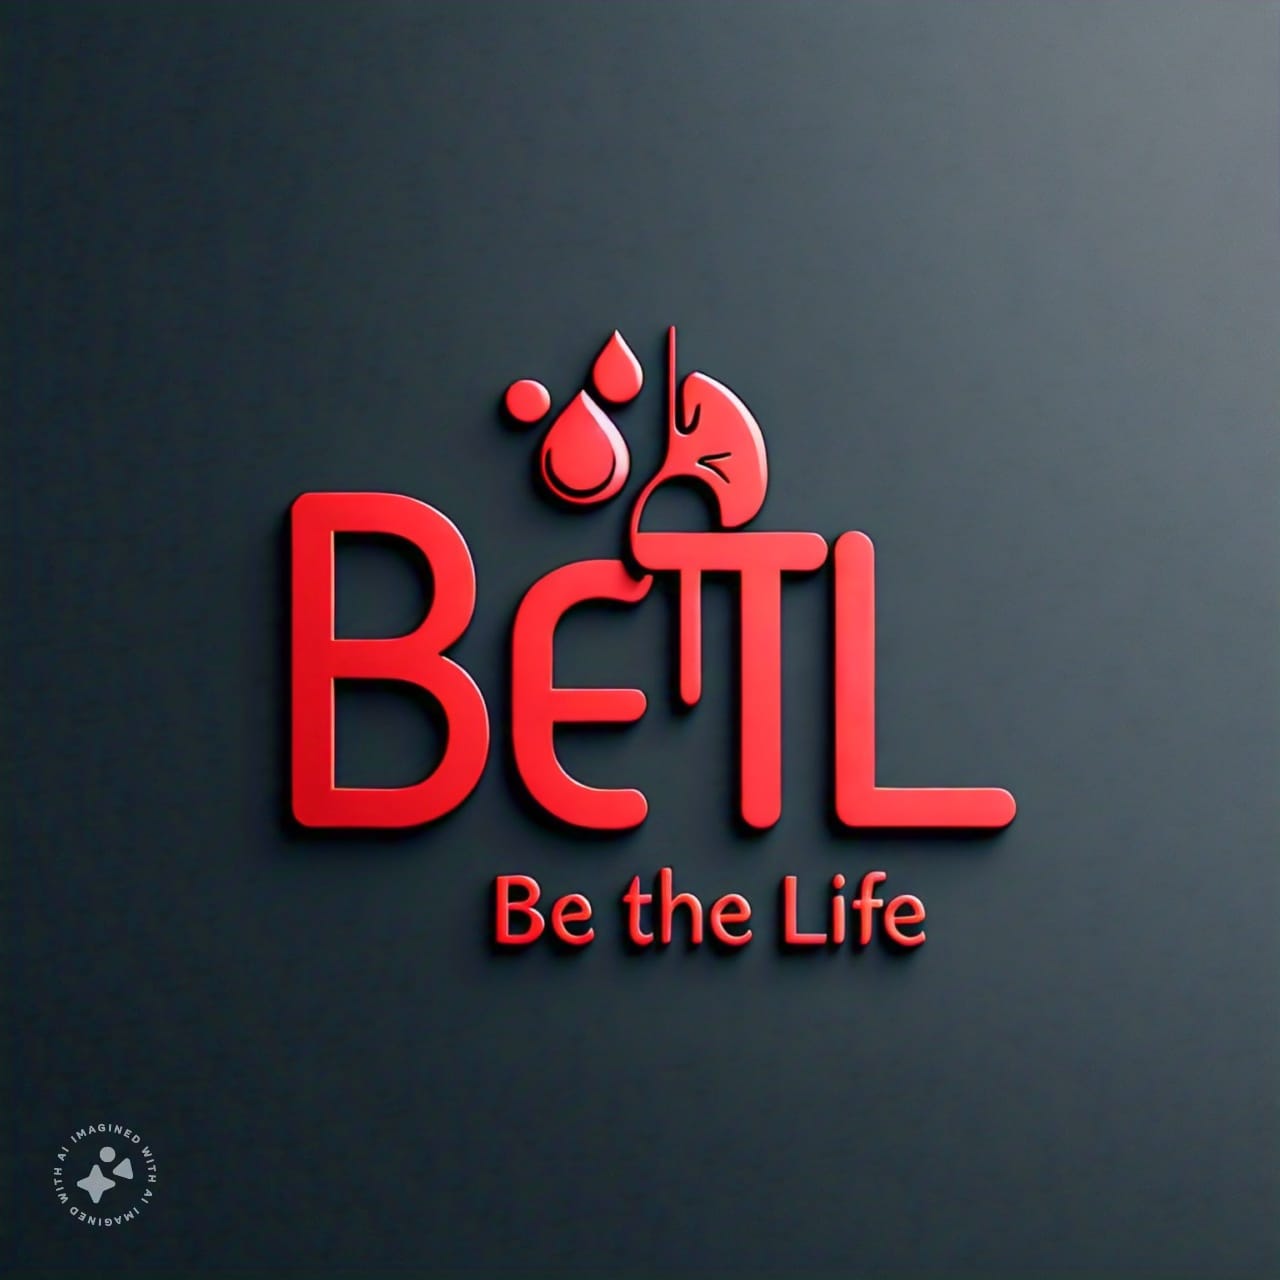 Hack4Bengal-30-BeTL-Be-The-Life